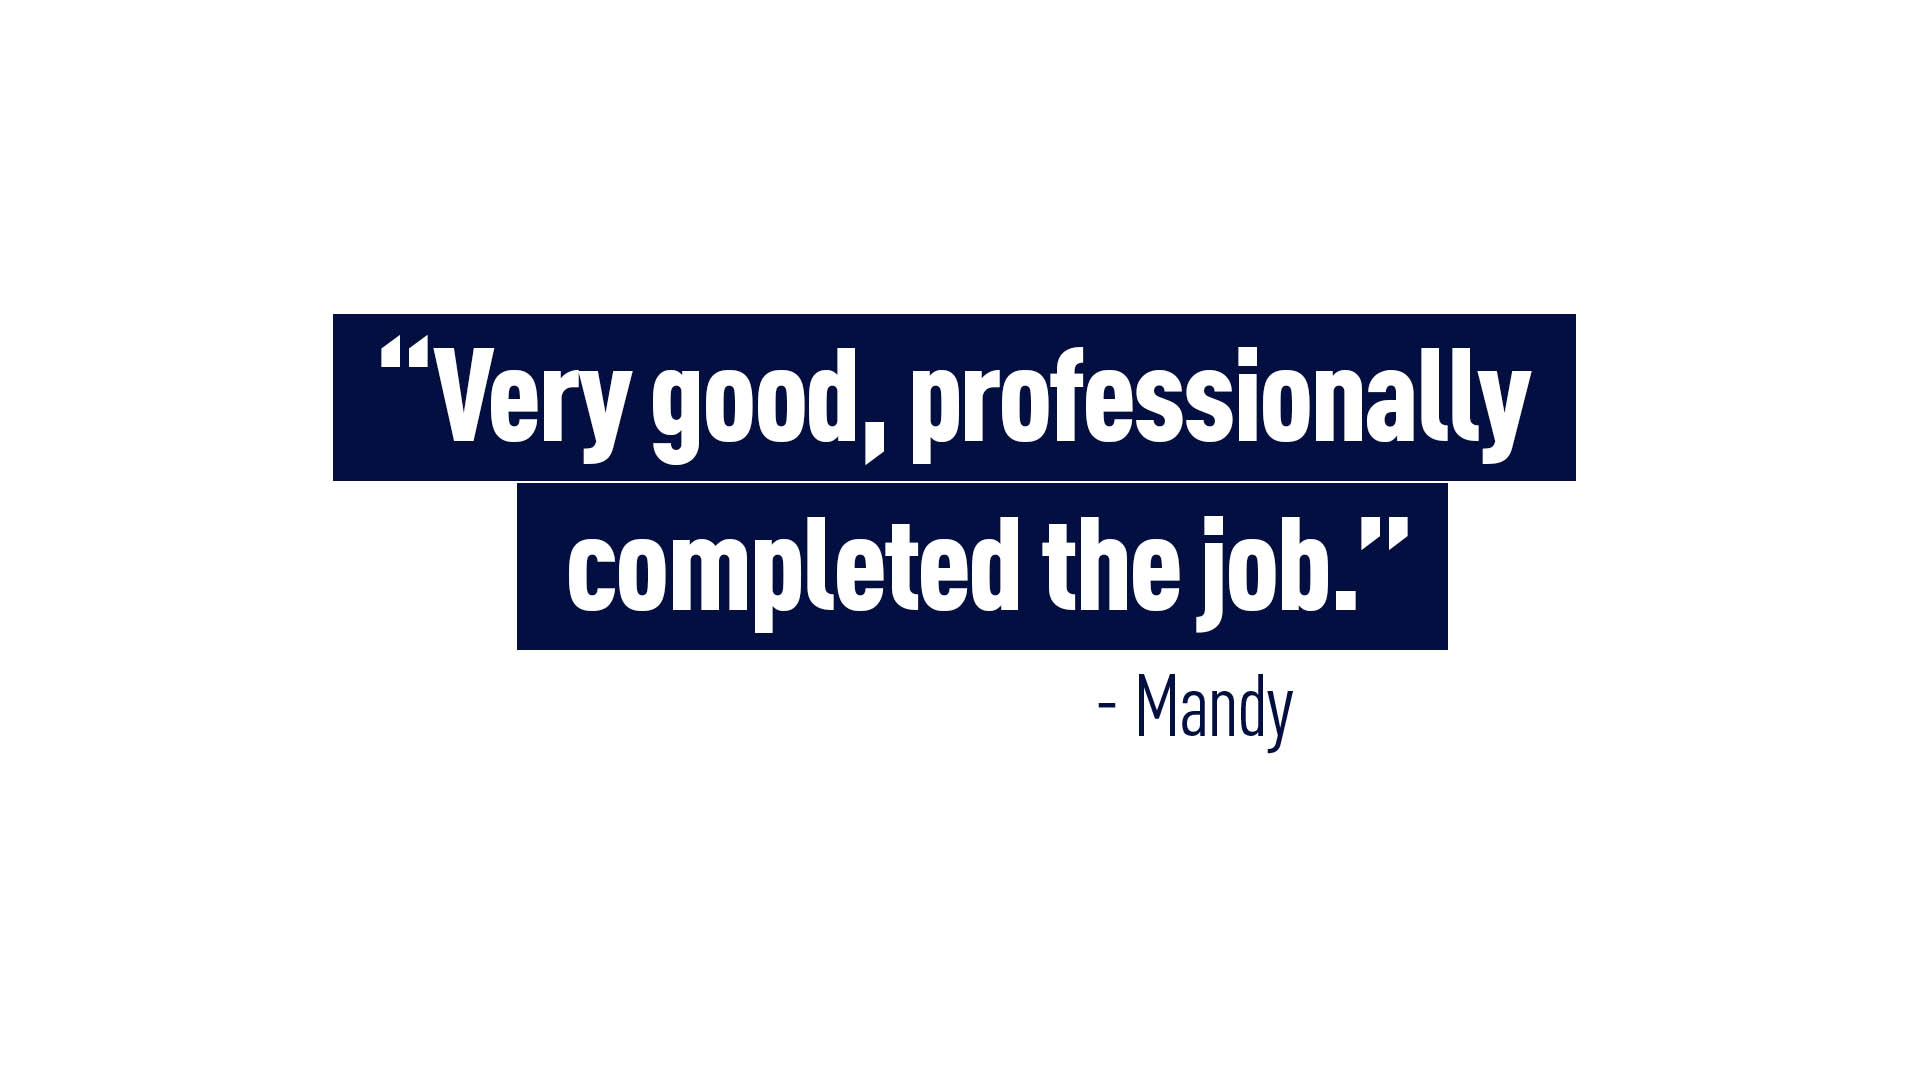 “Very good, professionally completed the job.” - Mandy